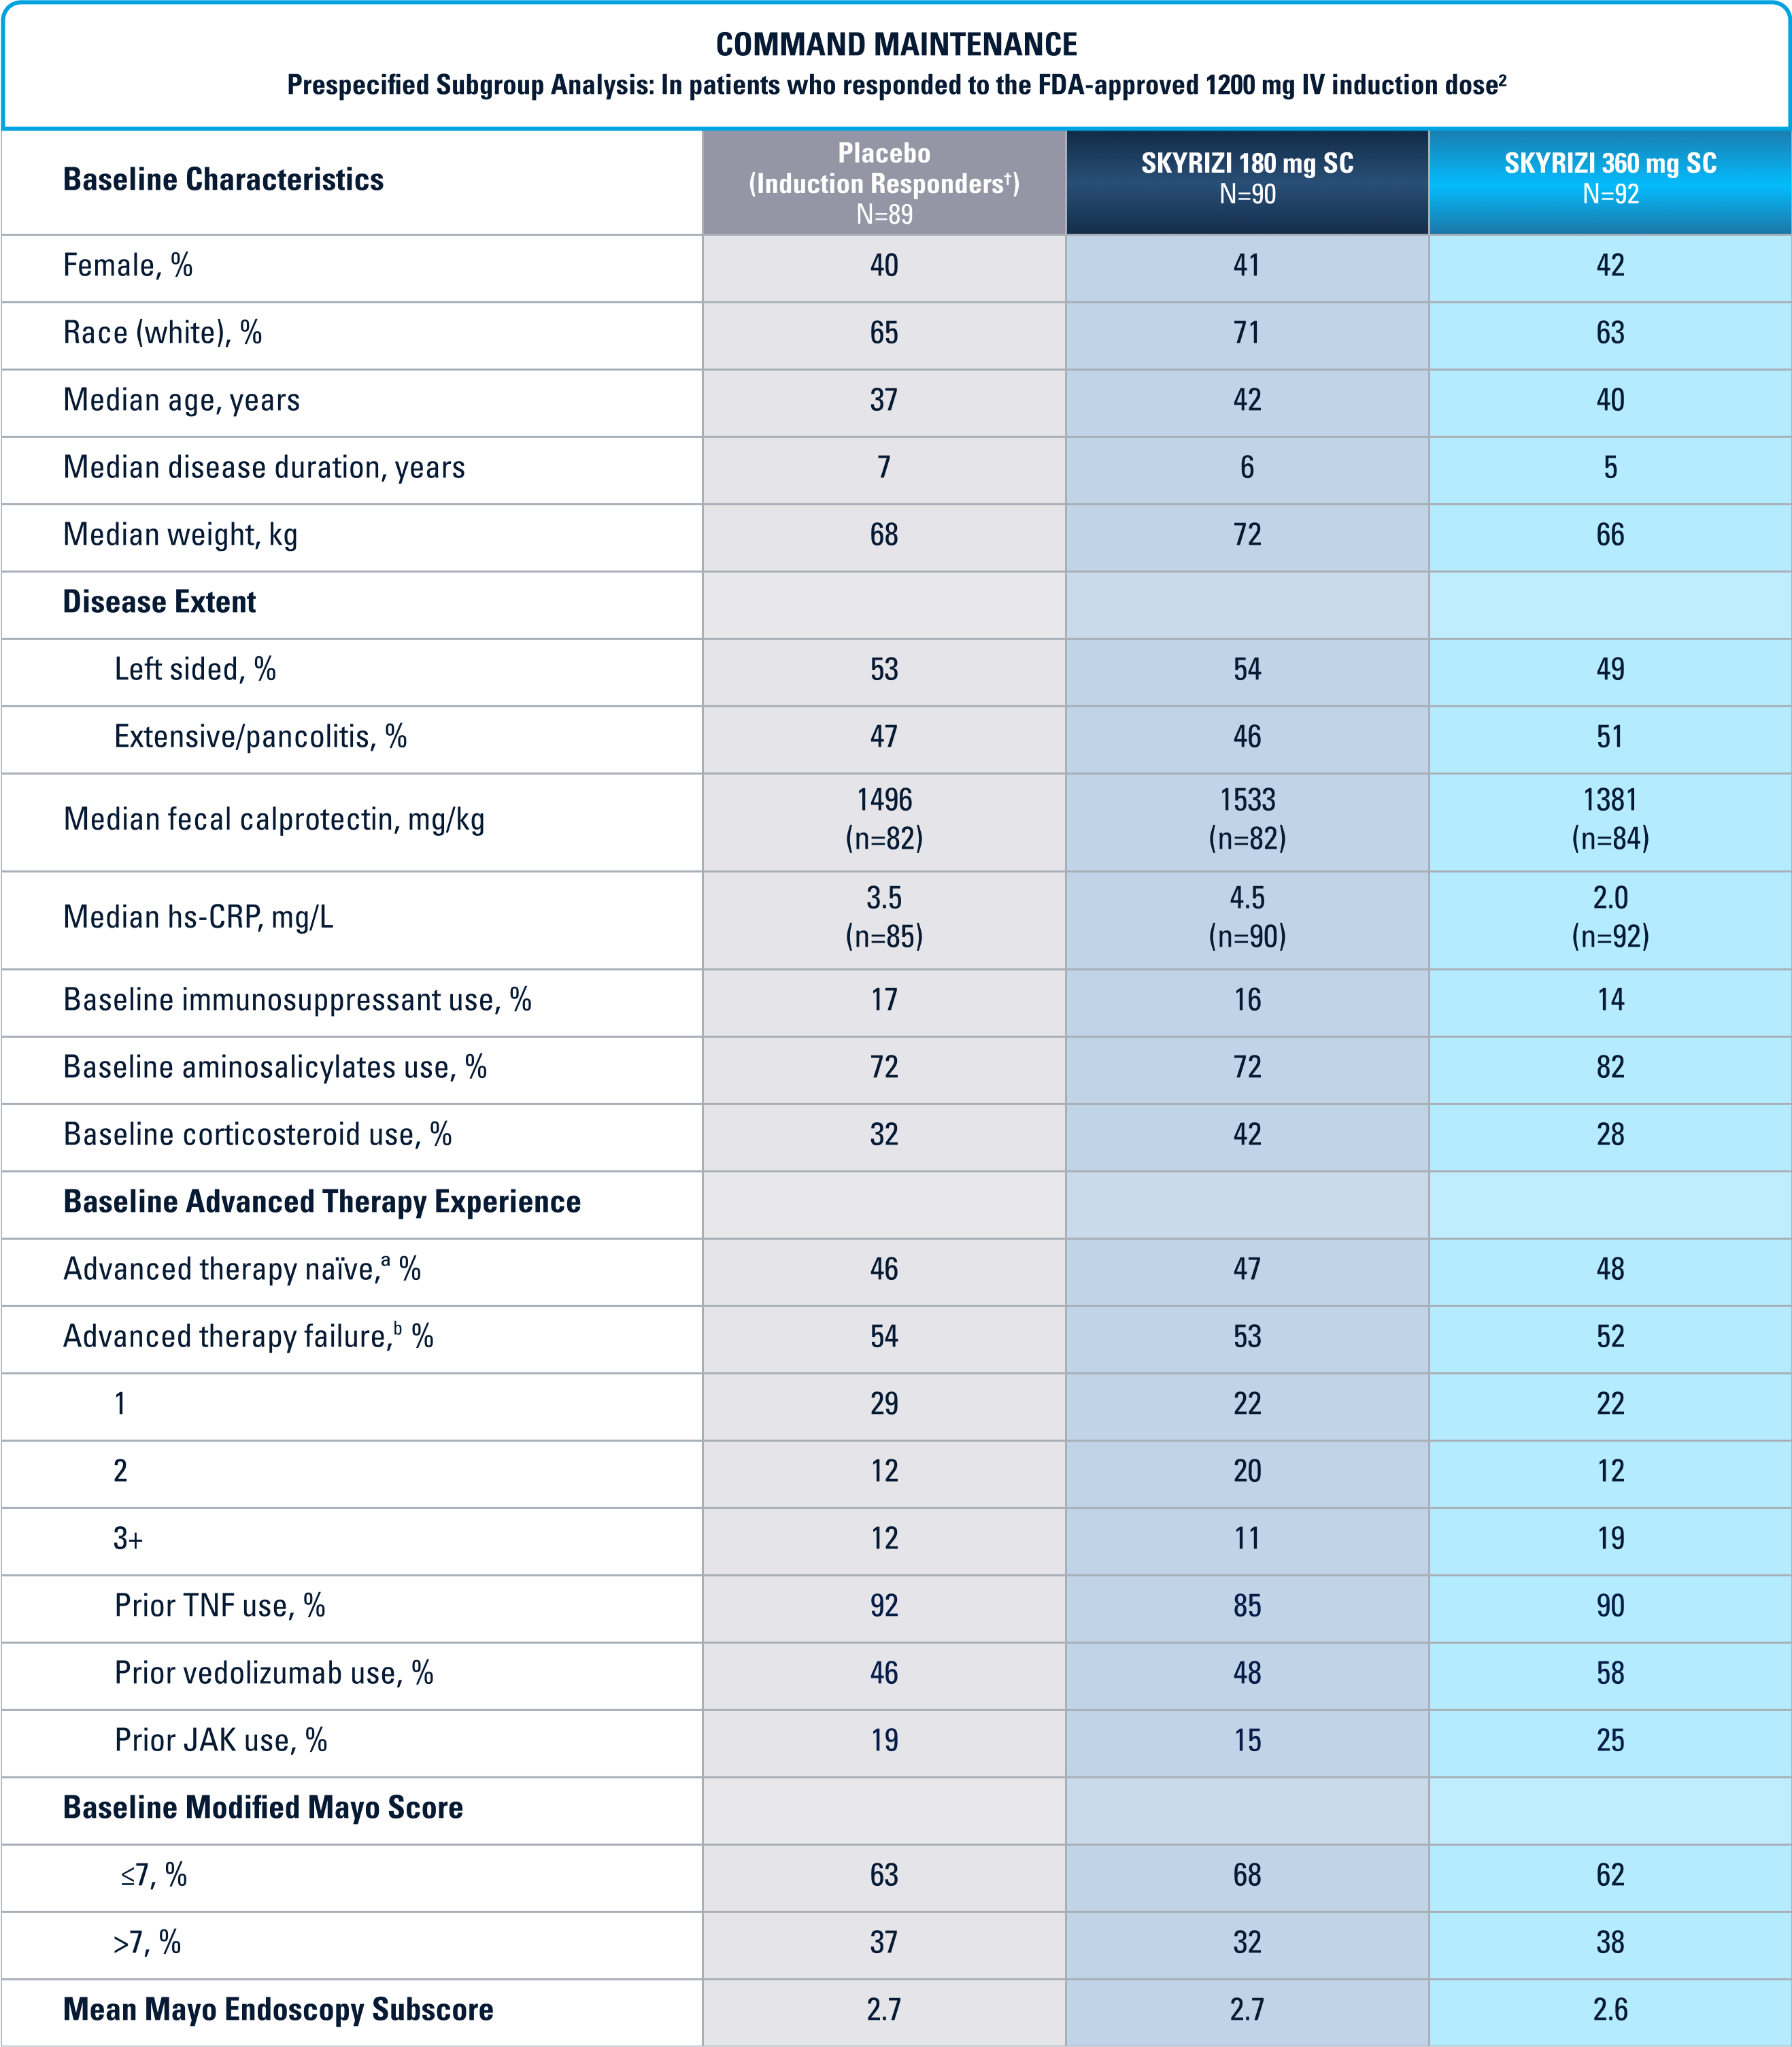 Command Maintenance table: Prespecified subgroup analysis: In patients who responded to the FDA-approved 1200 mg IV induction dose. Columns from left to right: Baseline characteristics, Placebo (Induction Responders) (n=89), SKYRIZI 180mg SC (n=90), SKYRIZI 360mg SC (n=92). Baseline characteristics: Female: 40%, 41%, 42%. Race (white): 65%, 71%, 63%. Median age (years): 37, 42, 40. Median disease duration (years) 7, 6, 5. Median weight (kg) 68, 72, 66. Disease extent: Left-sided: 53%, 54%, 49%. Extensive/pancolitis: 47%, 46%, 51%. Median fecal calprotectin (mg/kg): 1496 (n=82), 1533 (n=82), 1381 (n=84). Median hs-CRP (mg/L): 3.5 (n=85), 4.5 (n=90), 2.0 (n=92). Baseline immunosuppressant use: 17%, 16%, 14%. Baseline aminosalicylates use: 72%, 72%, 82%. Baseline corticosteroid use: 32%, 42%, 28%. Baseline advanced therapy experience: Advanced therapy-naïve: 46%, 47%, 48%. Advanced therapy failure: 54%, 53%, 52%. One: 29, 22, 22. Two: 12, 20, 12. 3+: 12, 11, 19. Prior TNF use: 92%, 85%, 90%. Prior vedolizumab use: 46%, 48%, 58%. Prior JAK use: 19%, 15%, 25%. Baseline modified Mayo ≤7: 63%, 68%, 62%. Baseline modified Mayo Score >7: 37%, 32%, 38%. Mean Mayo endoscopy subscore: 2.7, 2.7, 2.6.